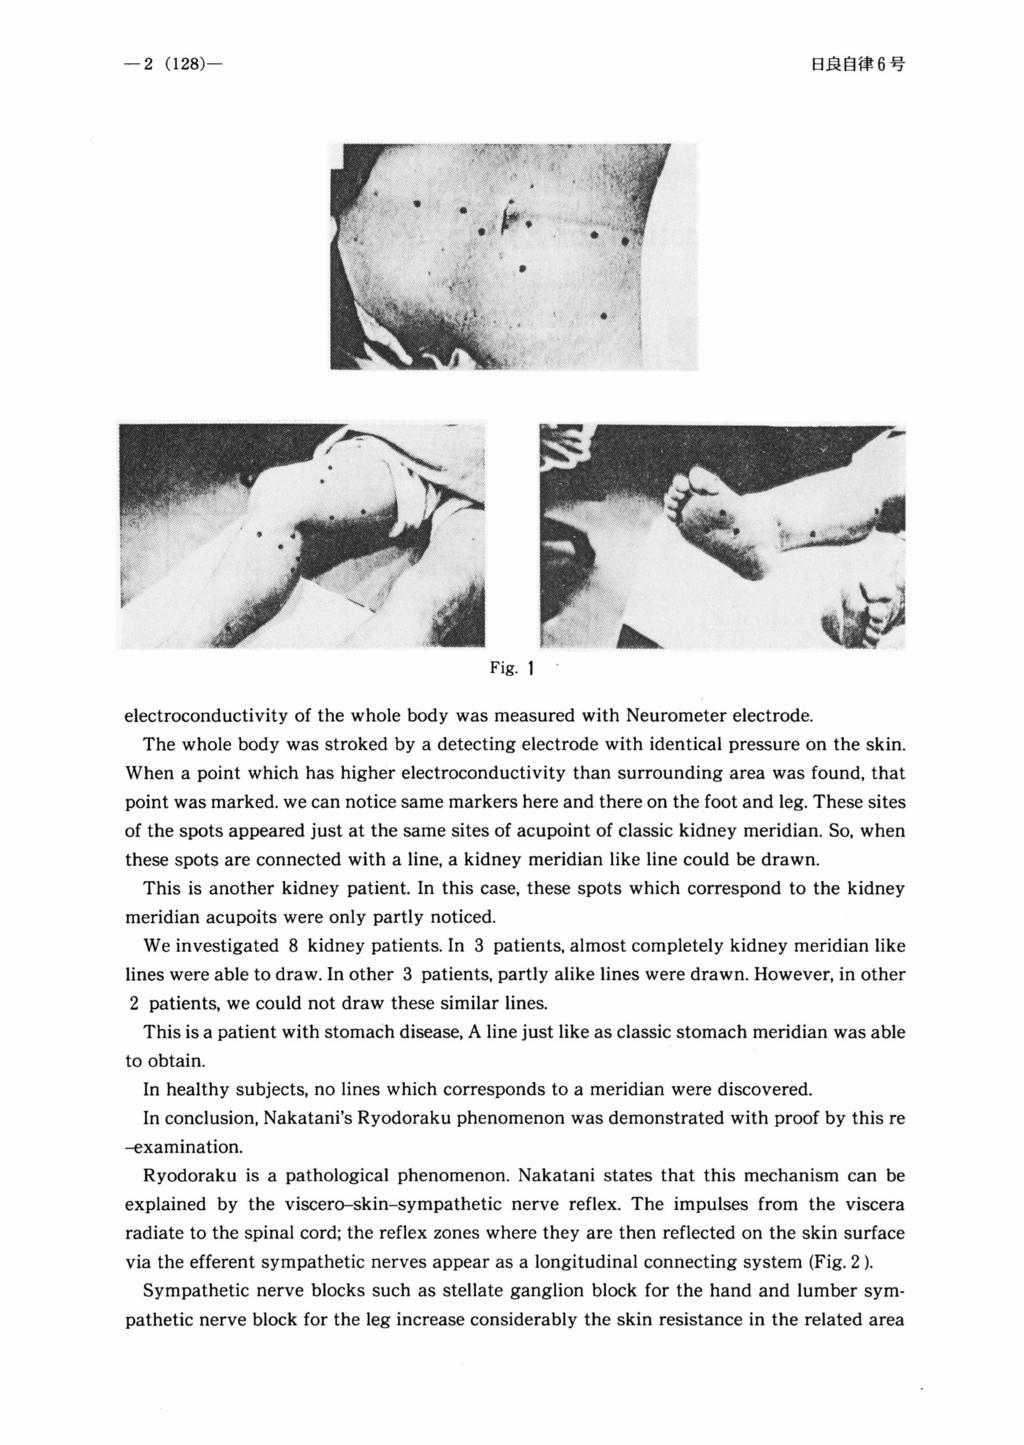 Fig. 1 electroconductivity of the whole body was measured with Neurometer electrode. The whole body was stroked by a detecting electrode with identical pressure on the skin.